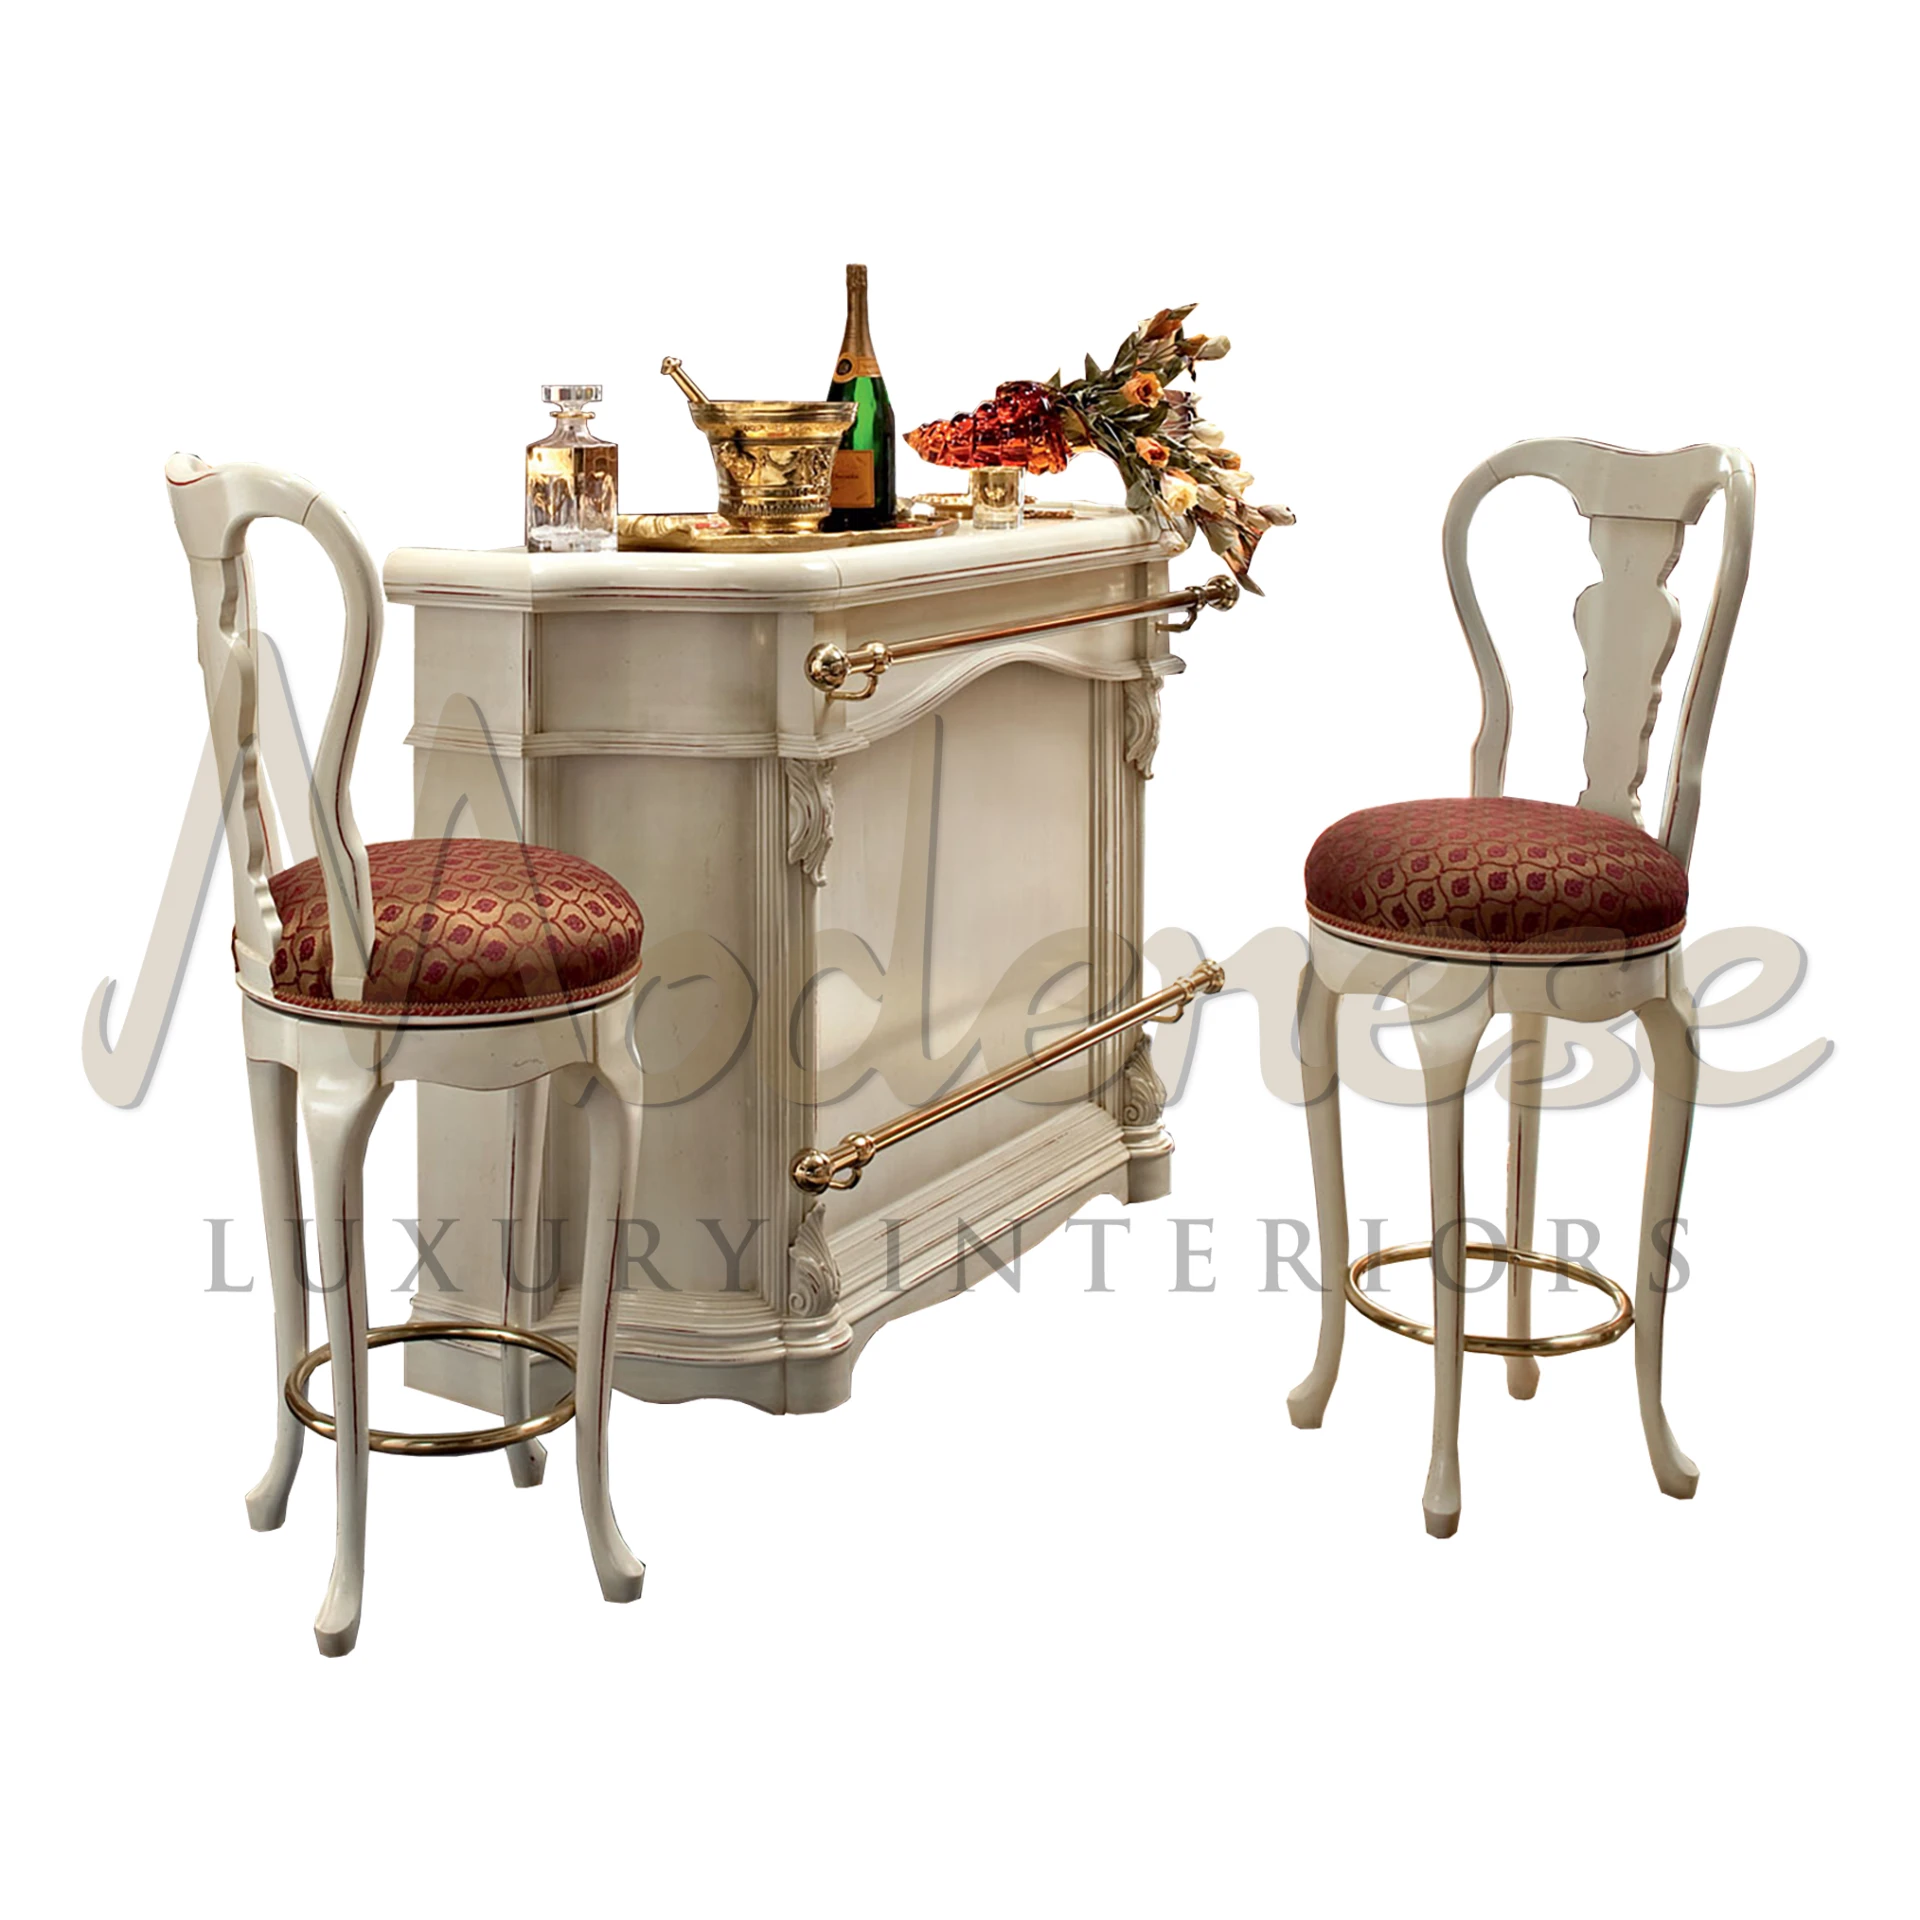 Explore this exquisite bar cabinet with ivory lacquer finish and golden metal accents. Ample storage for barware. From Modenese Furniture.